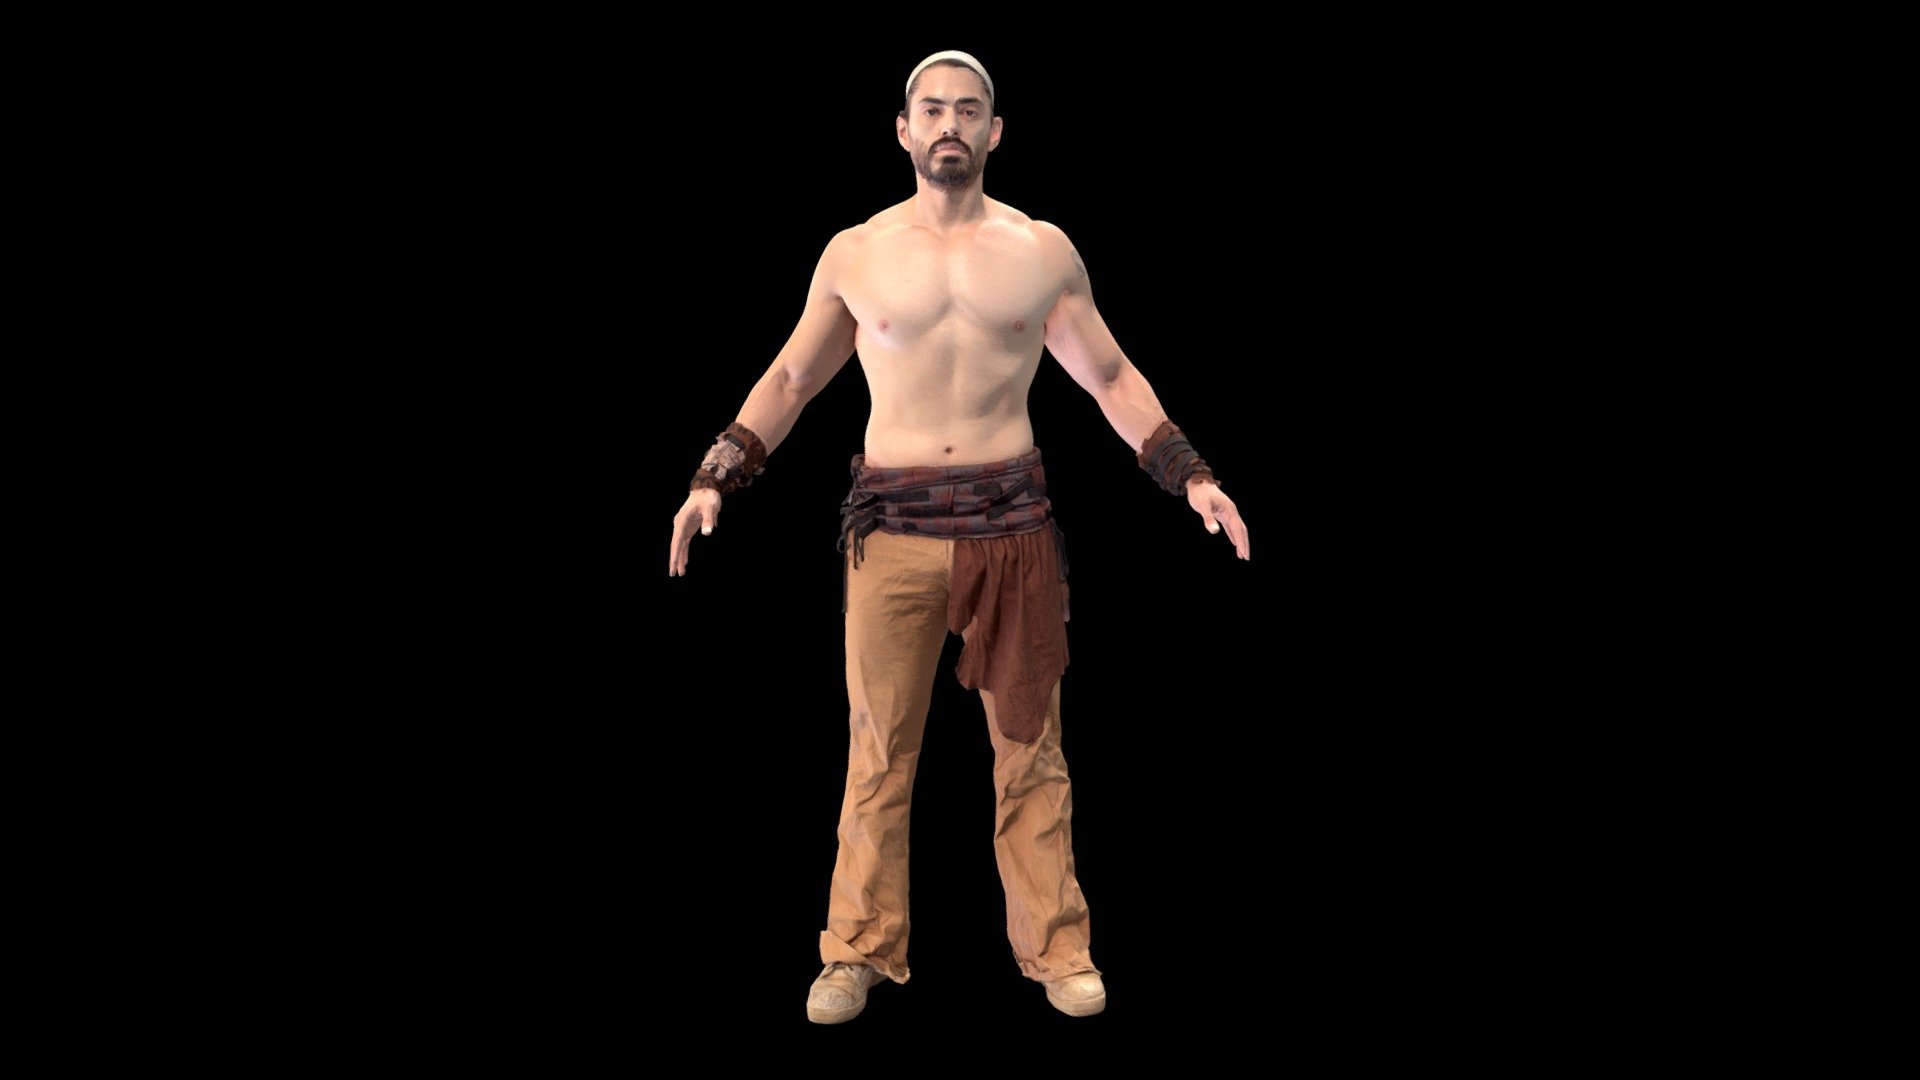 Victor in an A-pose showing his muscles.

Product Features:




Game Engine and PBR ready

High Poly

Textures:

All maps are in PNG format.




Diffuse Map (8192x8192)

Specular Map (8192x8192)

Roughness Map (8192x8192)

Normal Map (8192x8192)

SSS Map (8192x8192)

Model Polycounts:




159908 Faces

79938 Vertices

Available File Formats:




OBJ

FBX

About Human Engine:

Using our 150 DSLR Photogrammetry rig, we create 3D and 4D assets for Games, VFX, Movies, Television, Virtual Reality and Augmented Reality. From 3D scanning to rigging, game-engine integration, we have your character creation needs covered 3d model